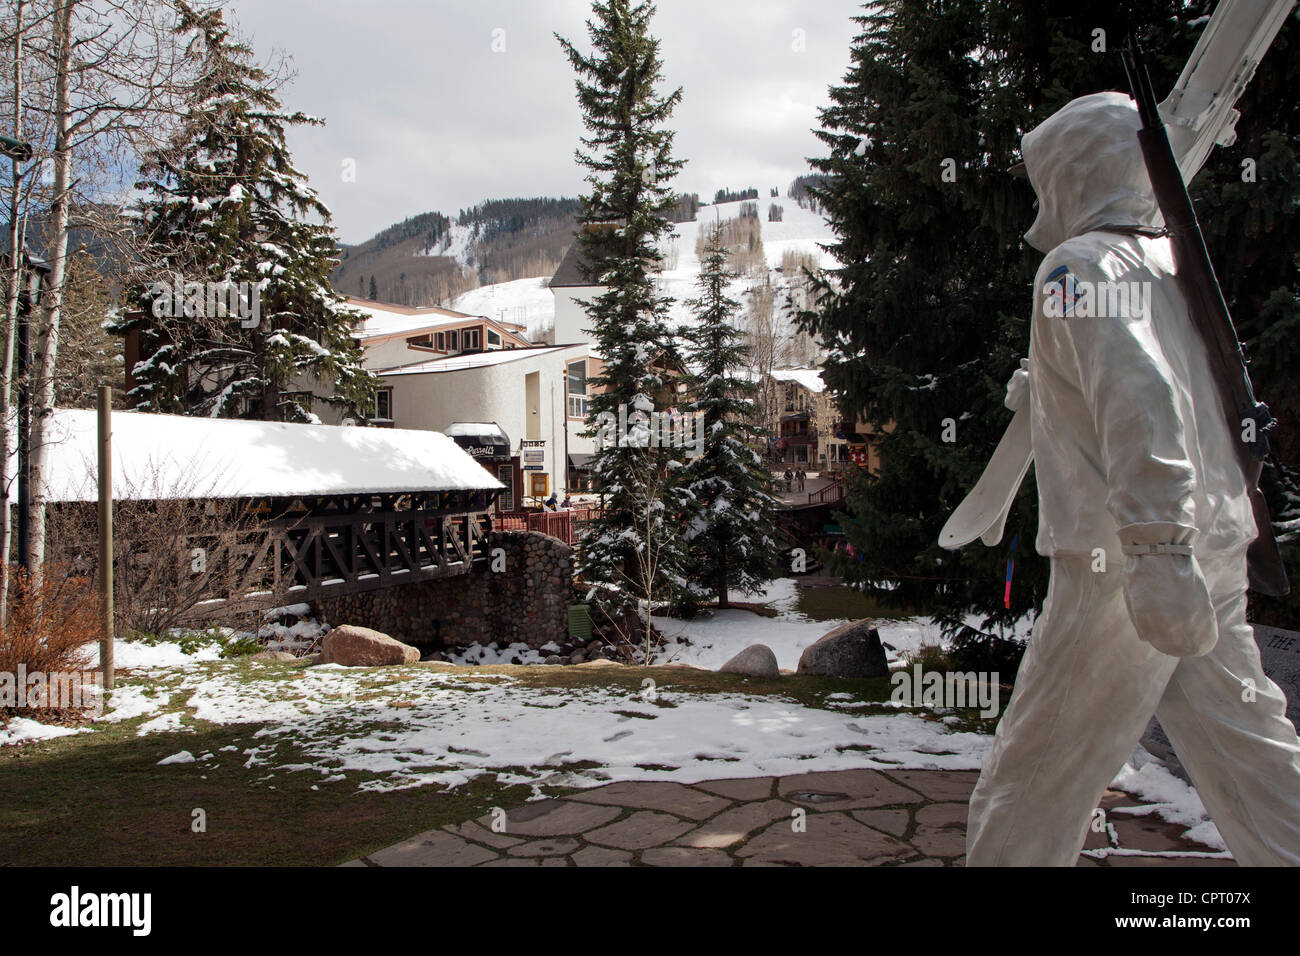 10th Mountain Division Soldier Statue - Vail Village - Vail, Colorado USA Stock Photo